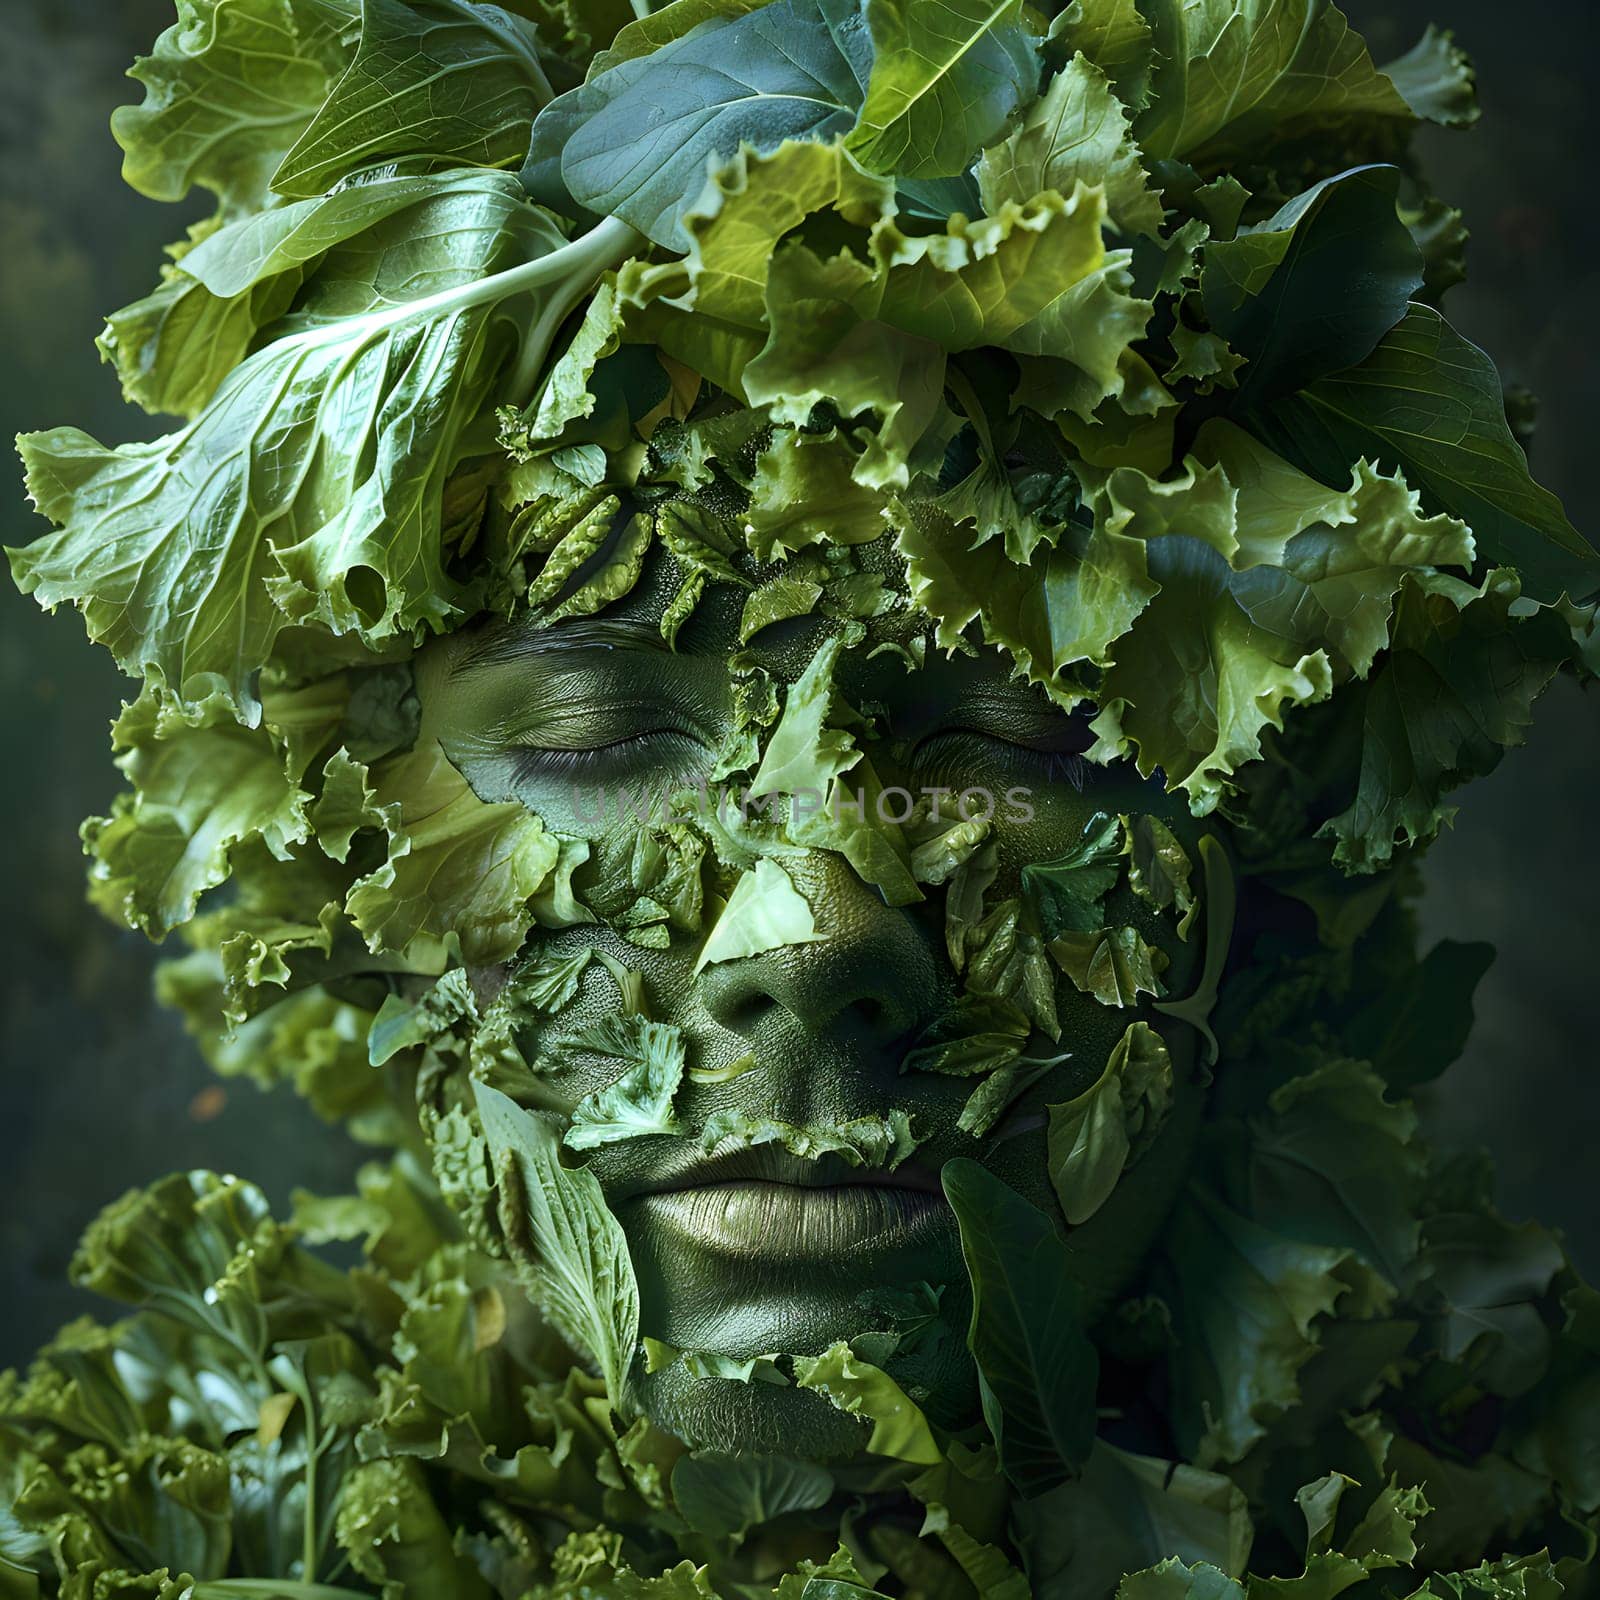 a close up of a person s face covered in lettuce leaves by Nadtochiy